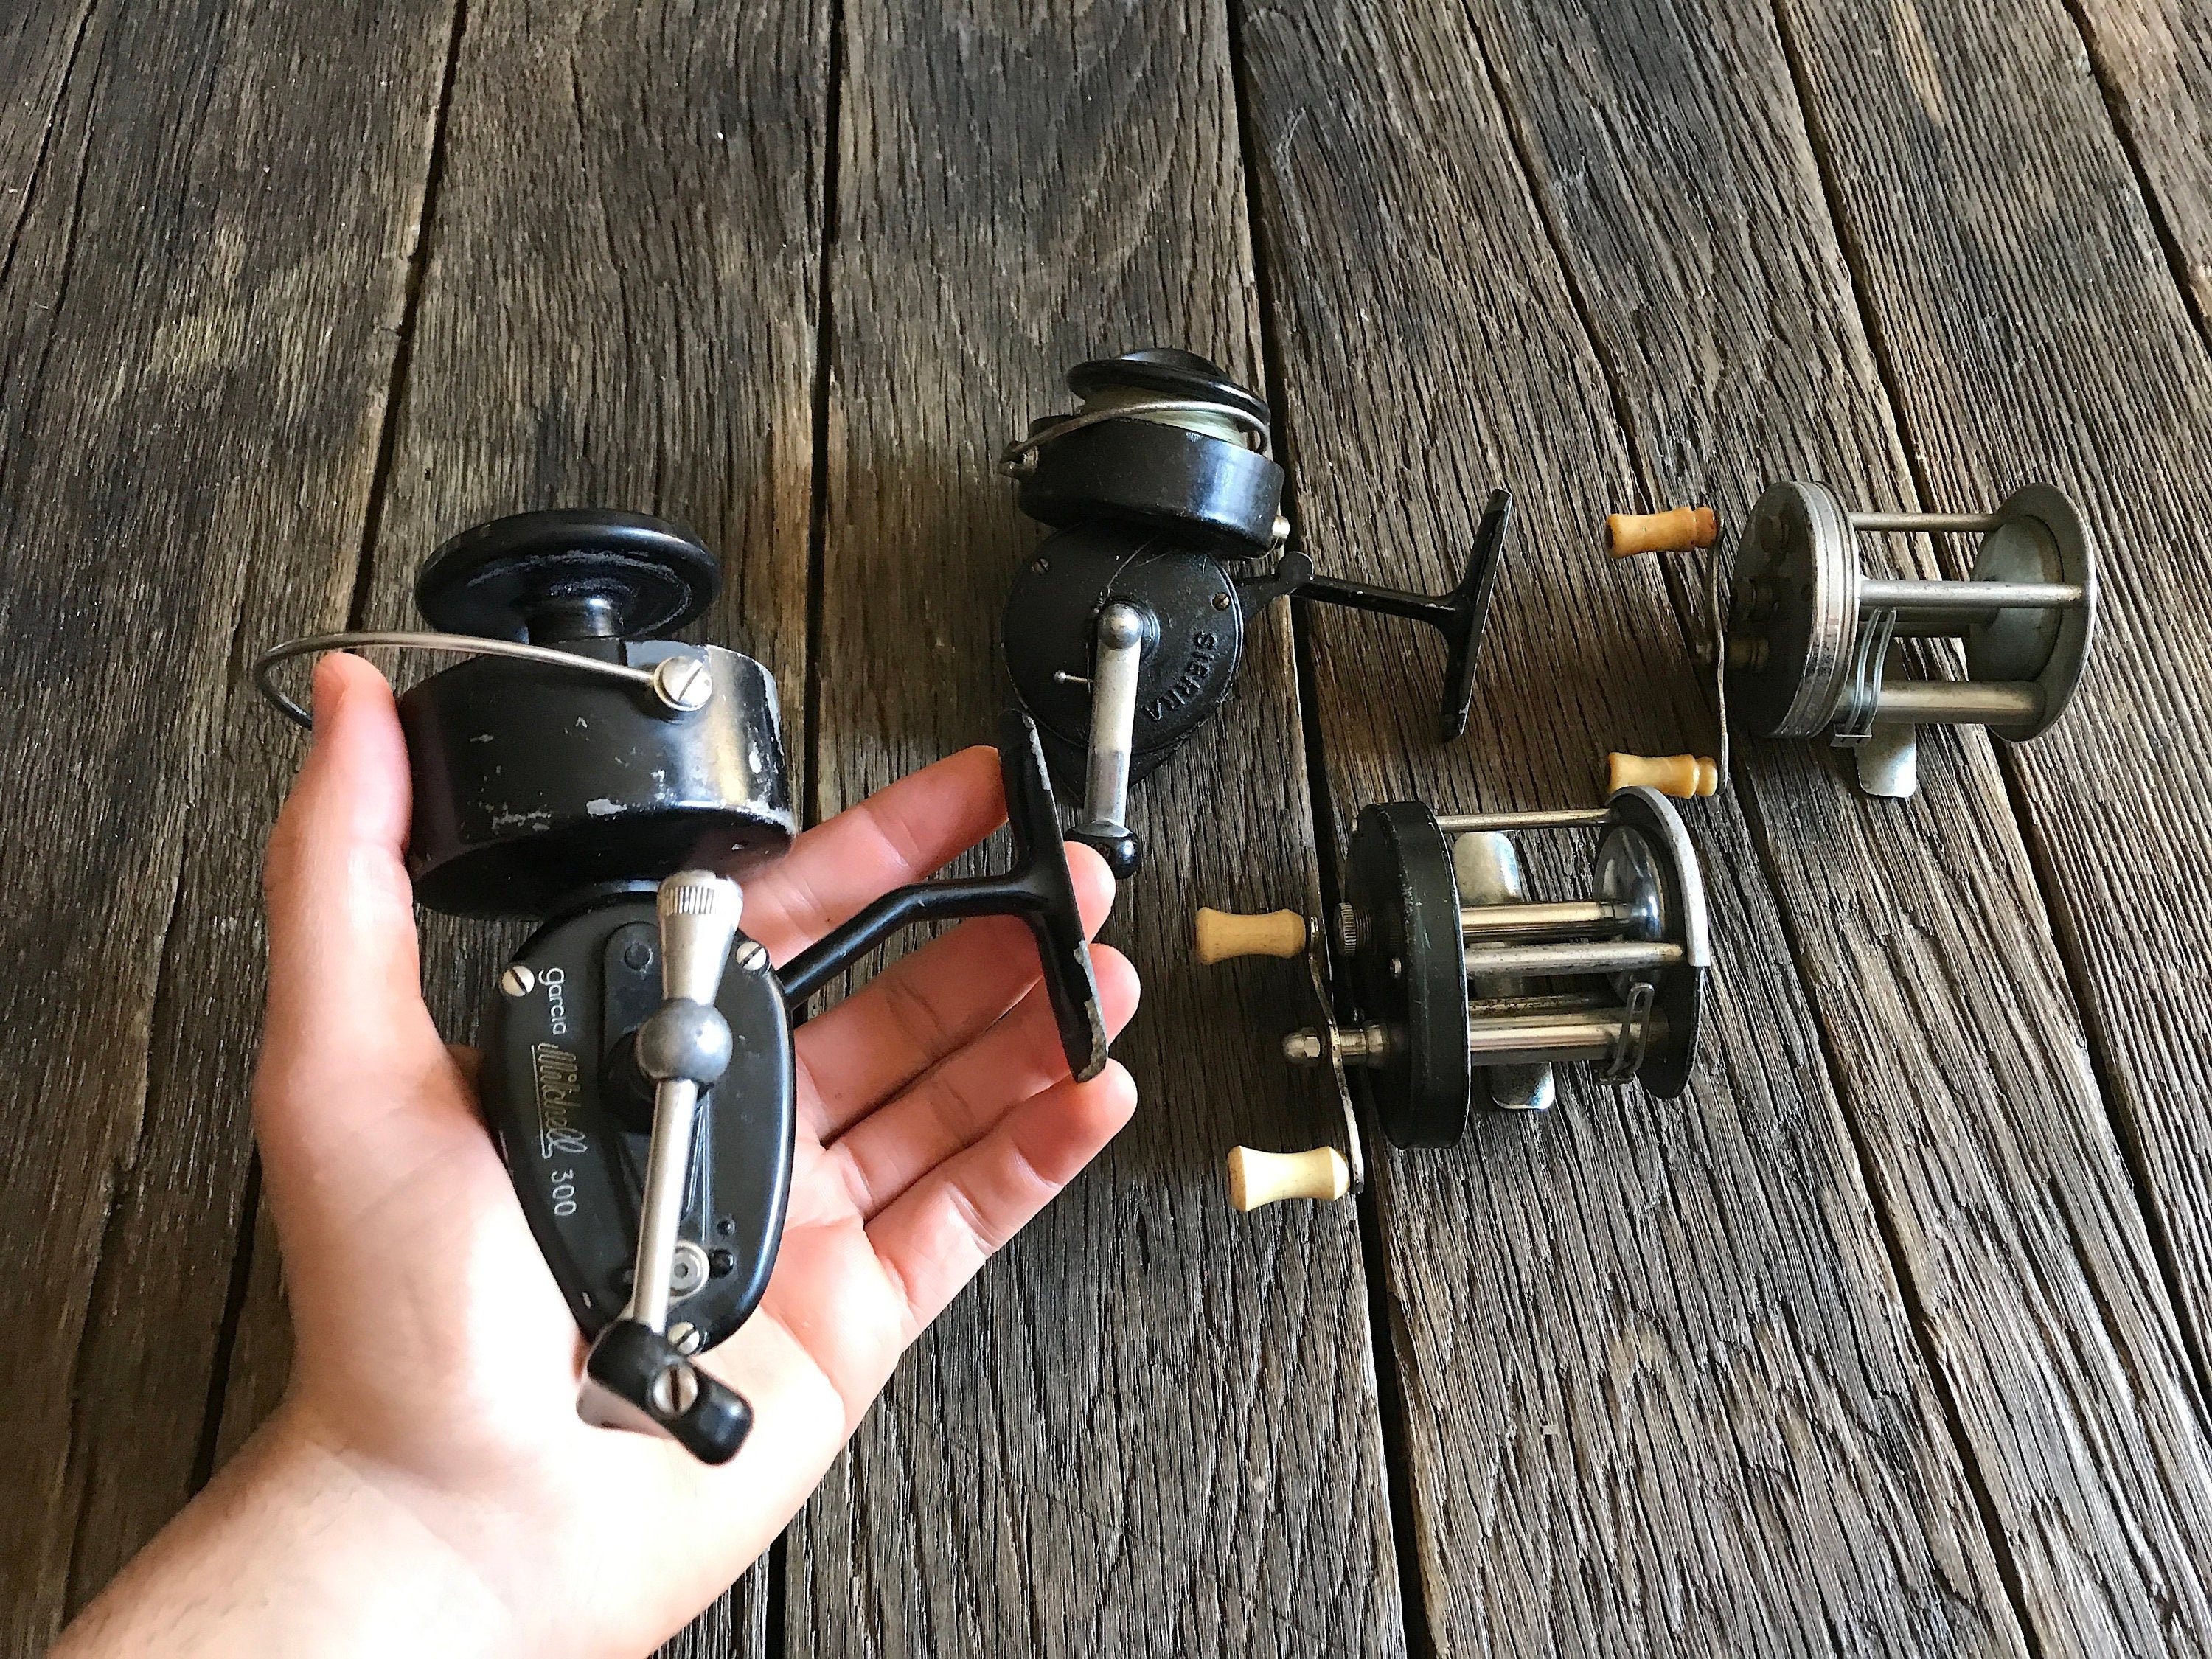 Vintage Fishing Reels Lot of 4 Vintage Fishing Reels Compac, Pflueger Reel  Old Fishing Reels Vintage Fishing Reel Collection -  New Zealand